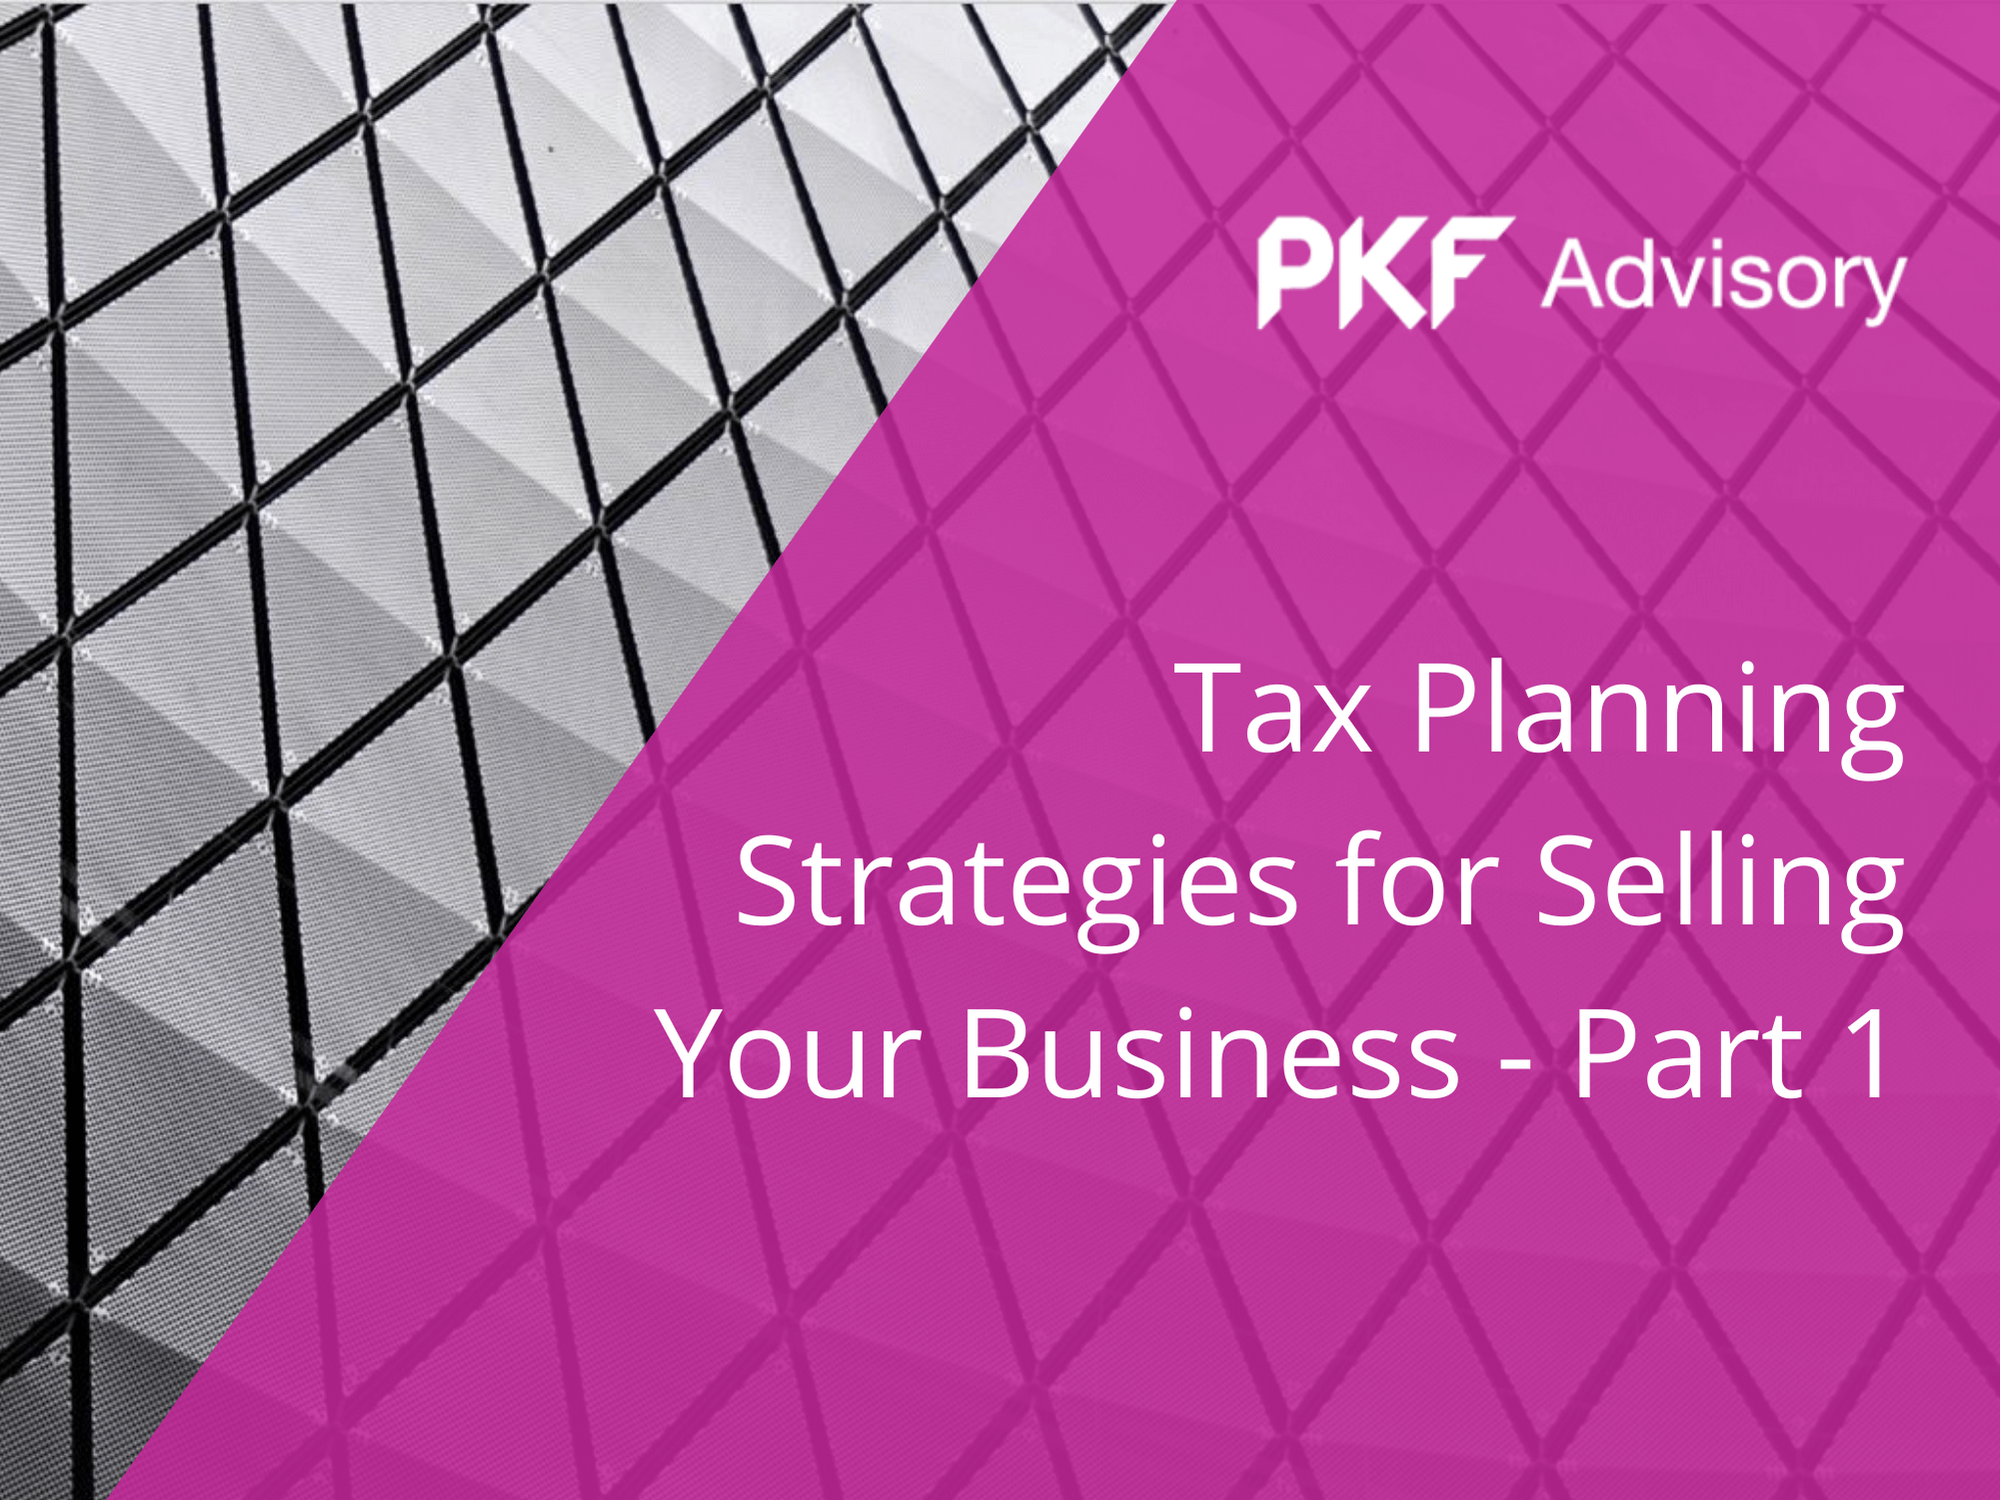 Tax Planning Strategies for Selling Your Business - Part 1